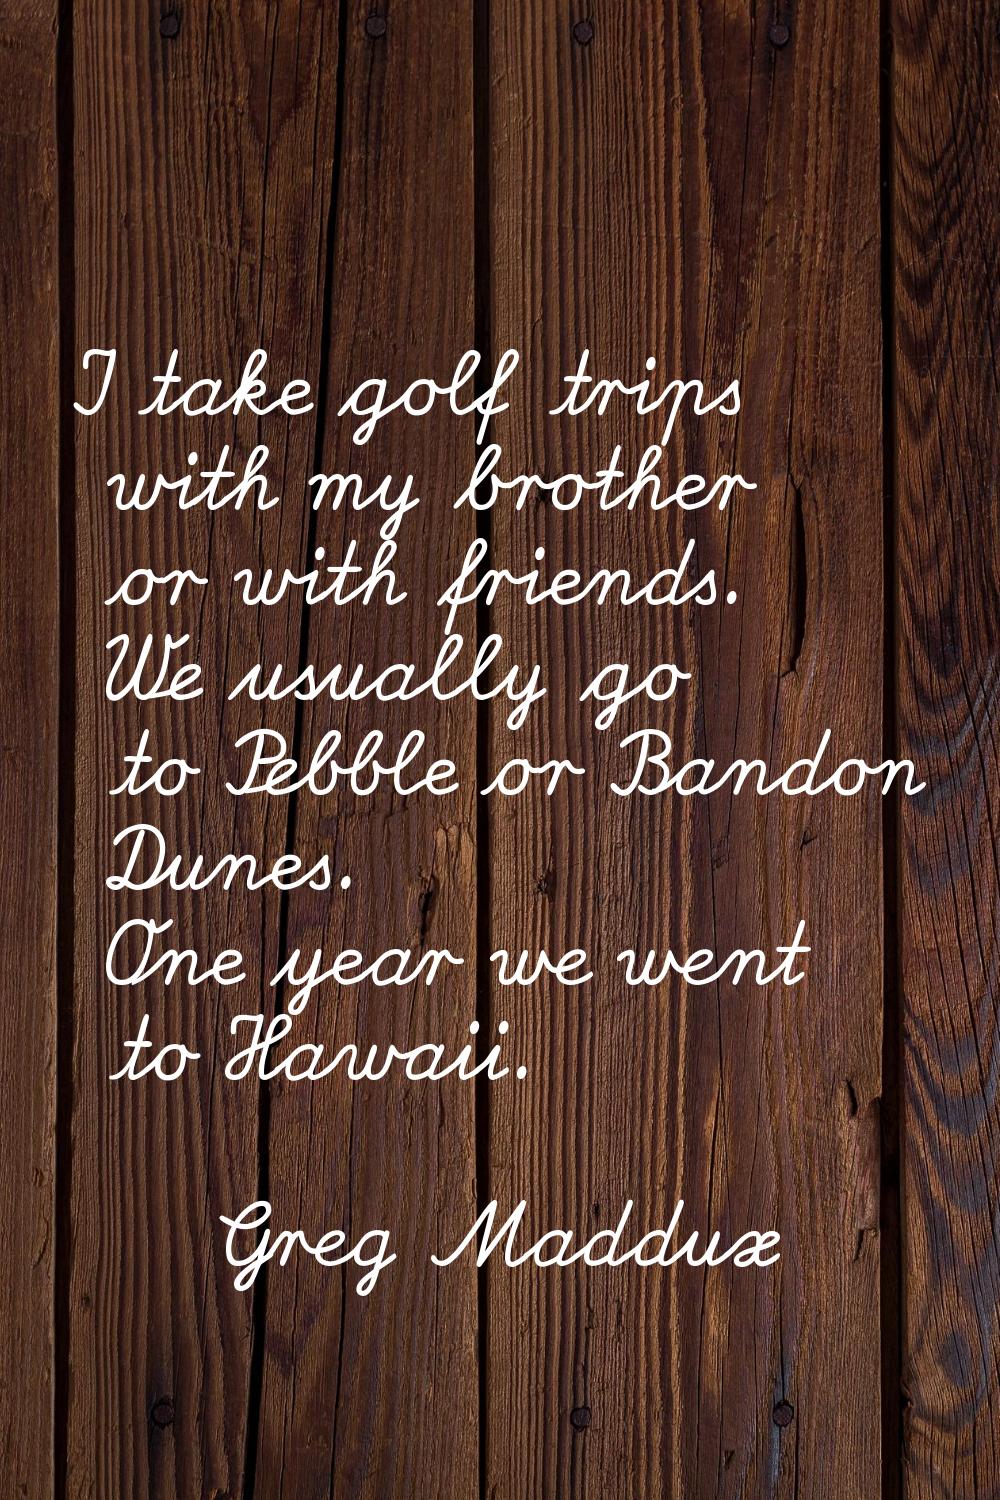 I take golf trips with my brother or with friends. We usually go to Pebble or Bandon Dunes. One yea